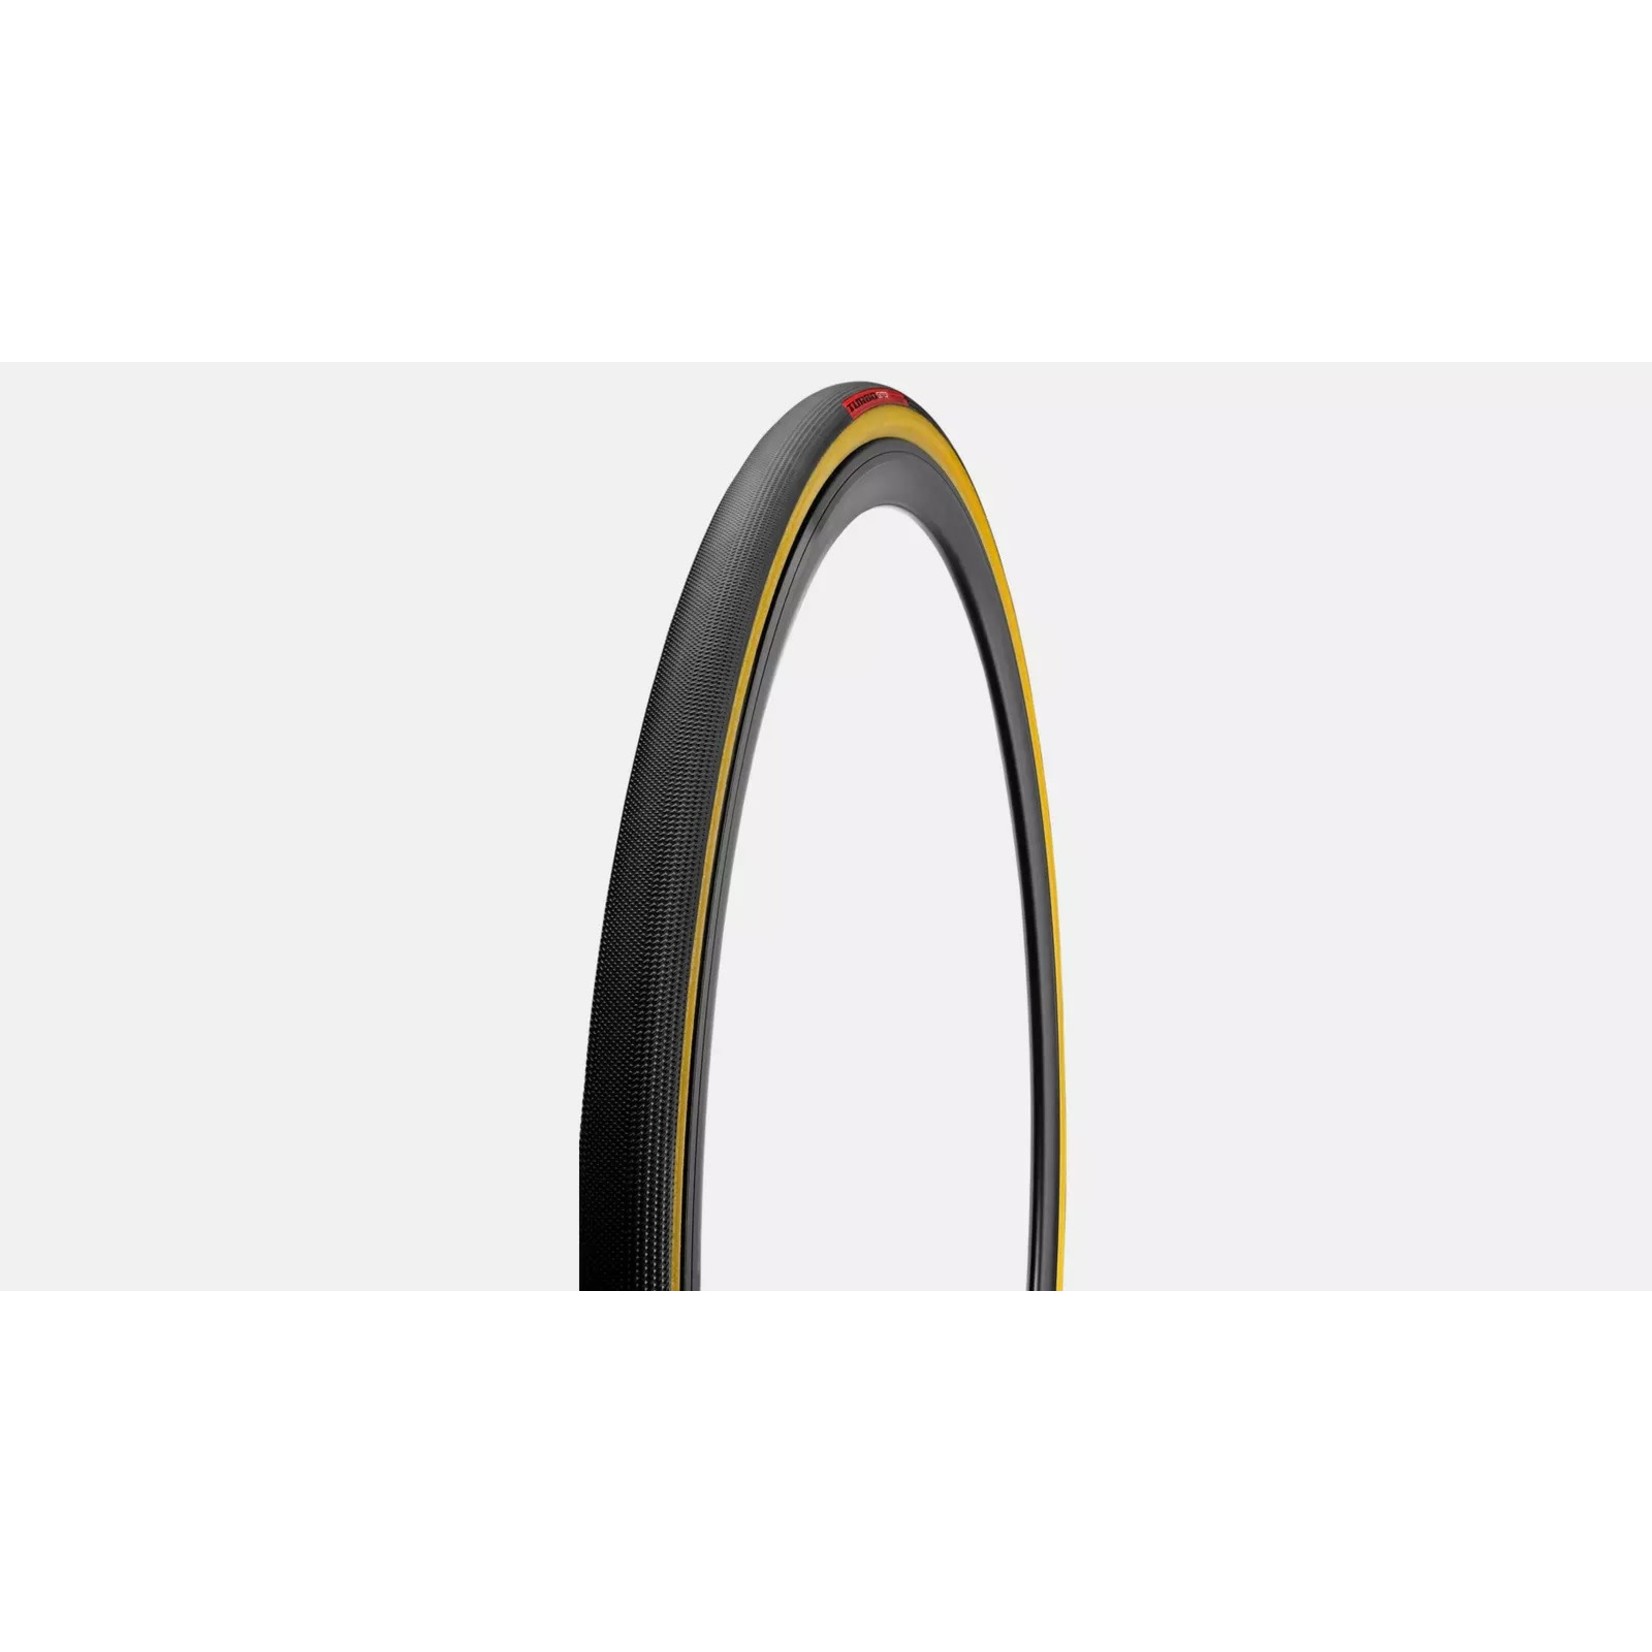 SPECIALIZED SPECIALIZED TURBO COTTON HELL OF THE NORTH TYRE 700X28